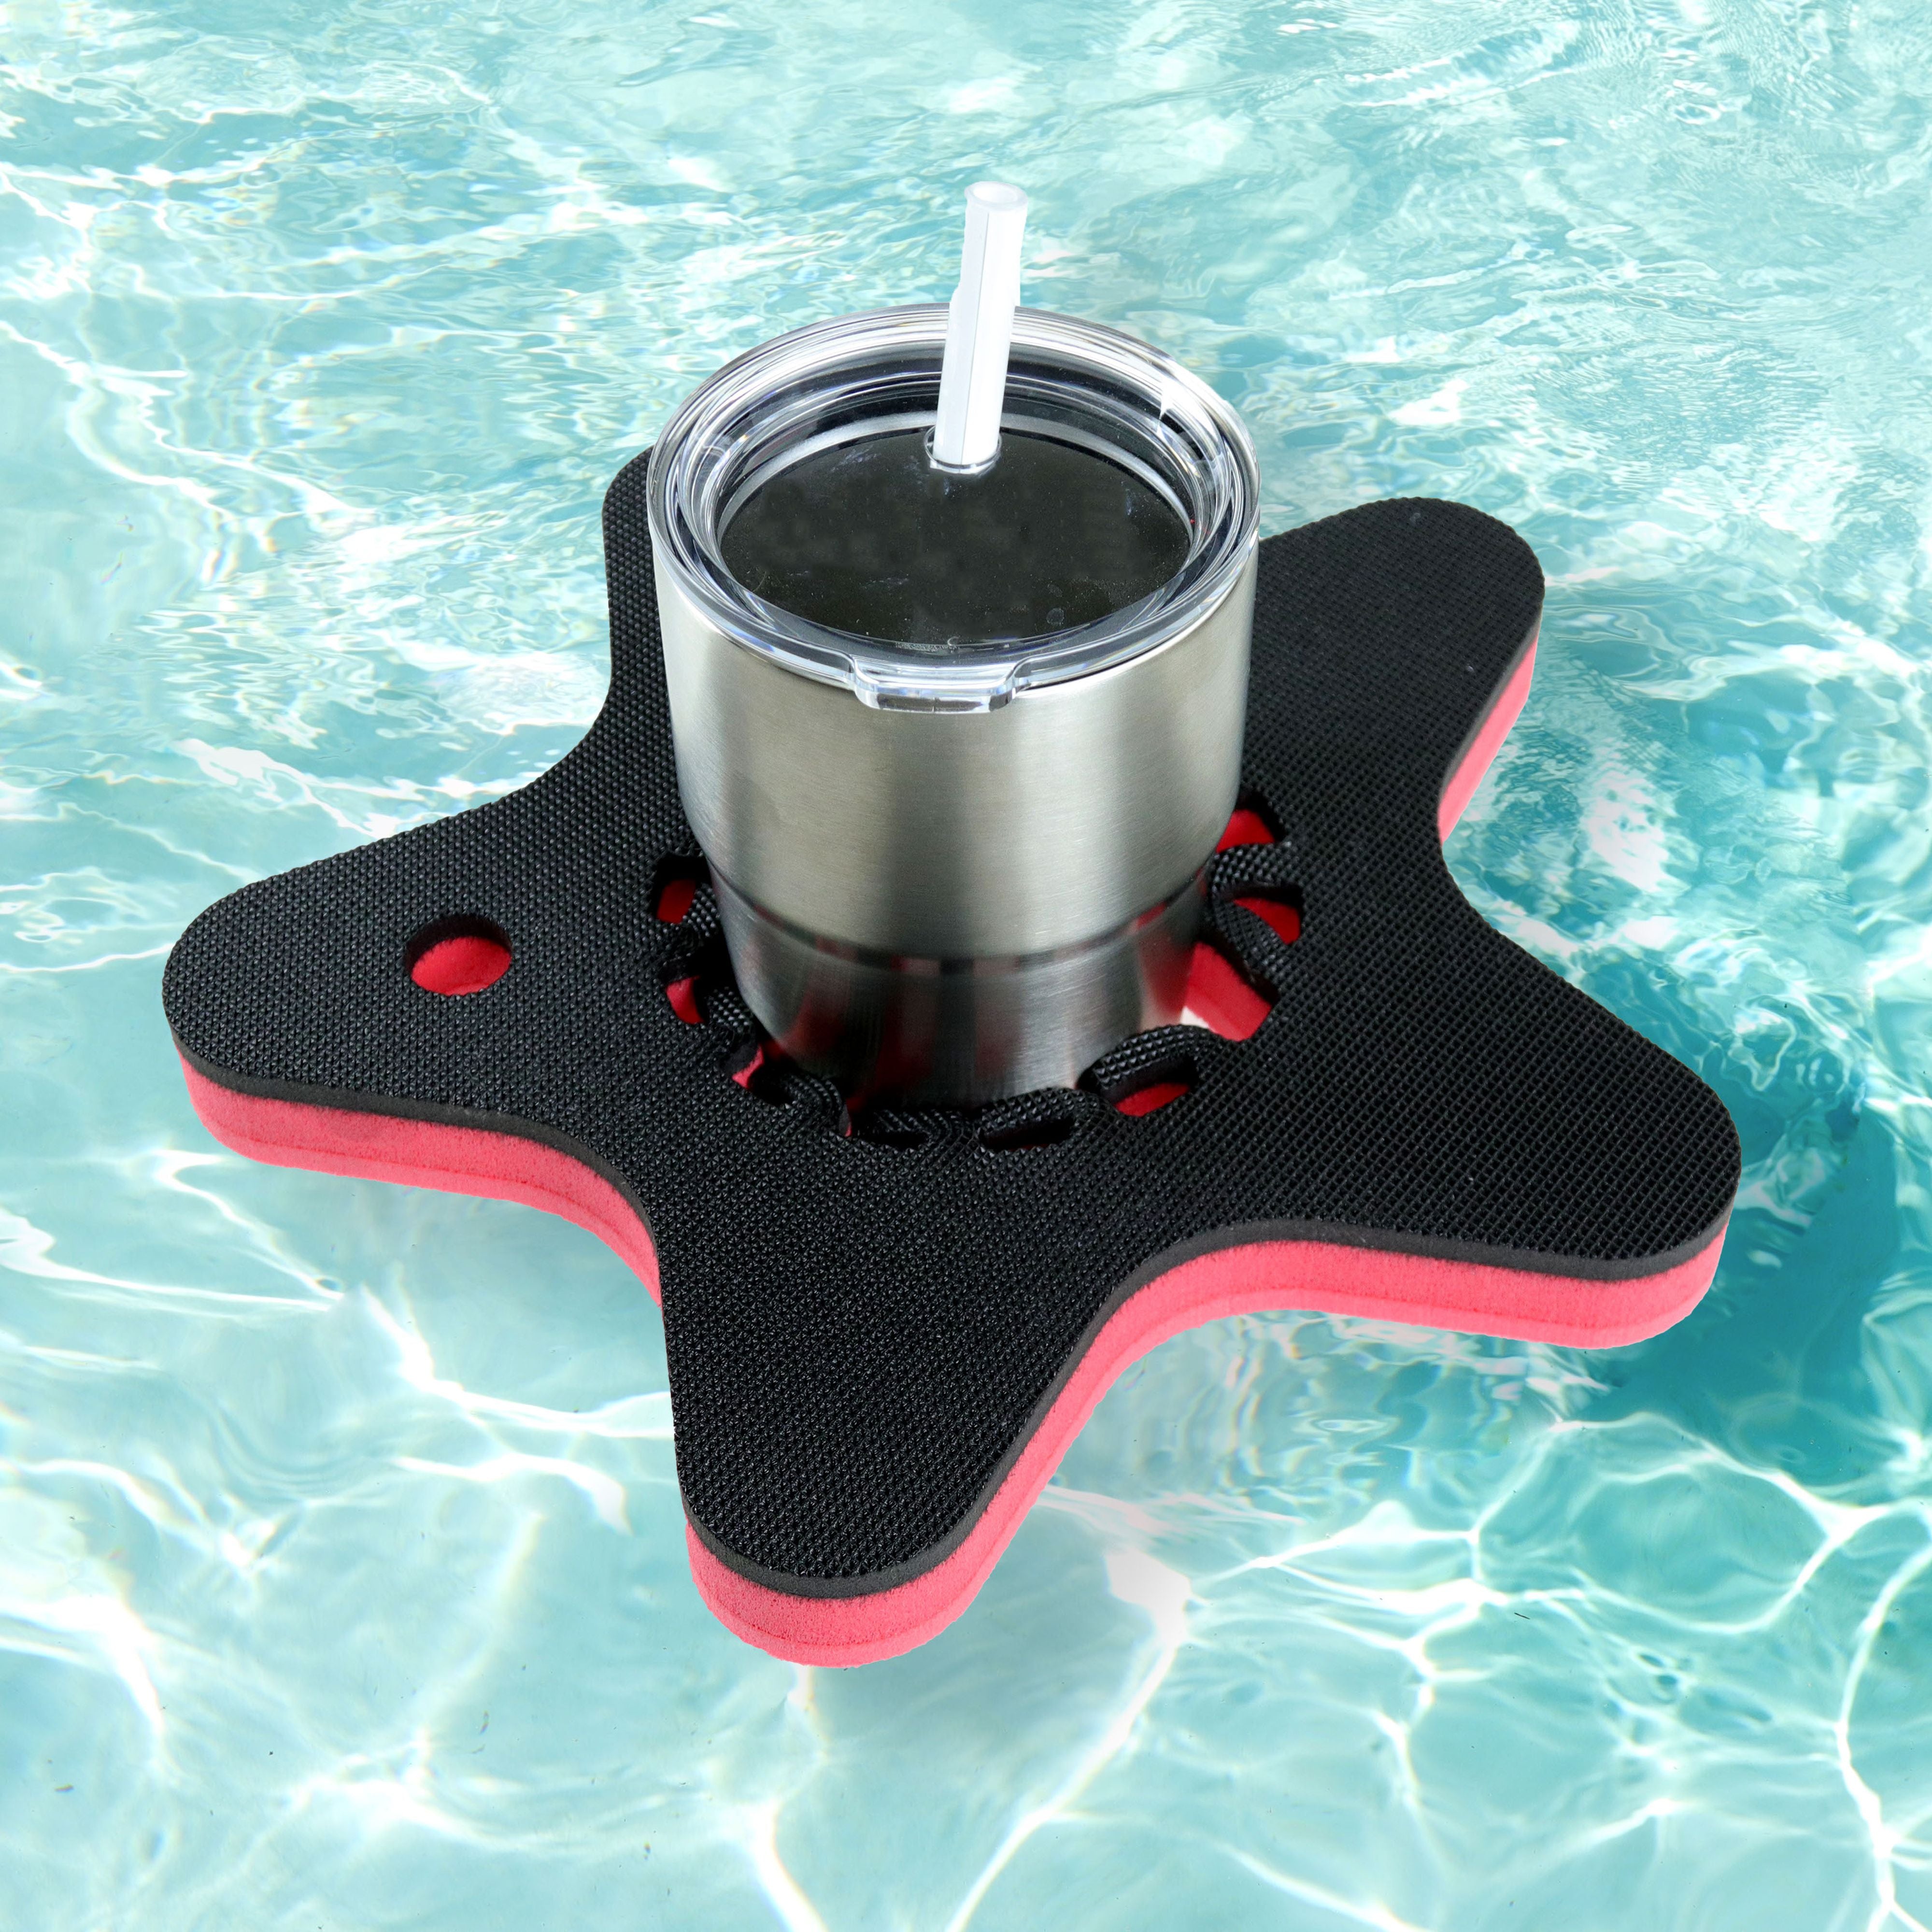 Universal Starfish Tumbler Holder Floating Drink Pool Durable 11.23 In fit 16 to 30 Oz Compatible with YETI Ozark Trail RTIC One Size Fits All